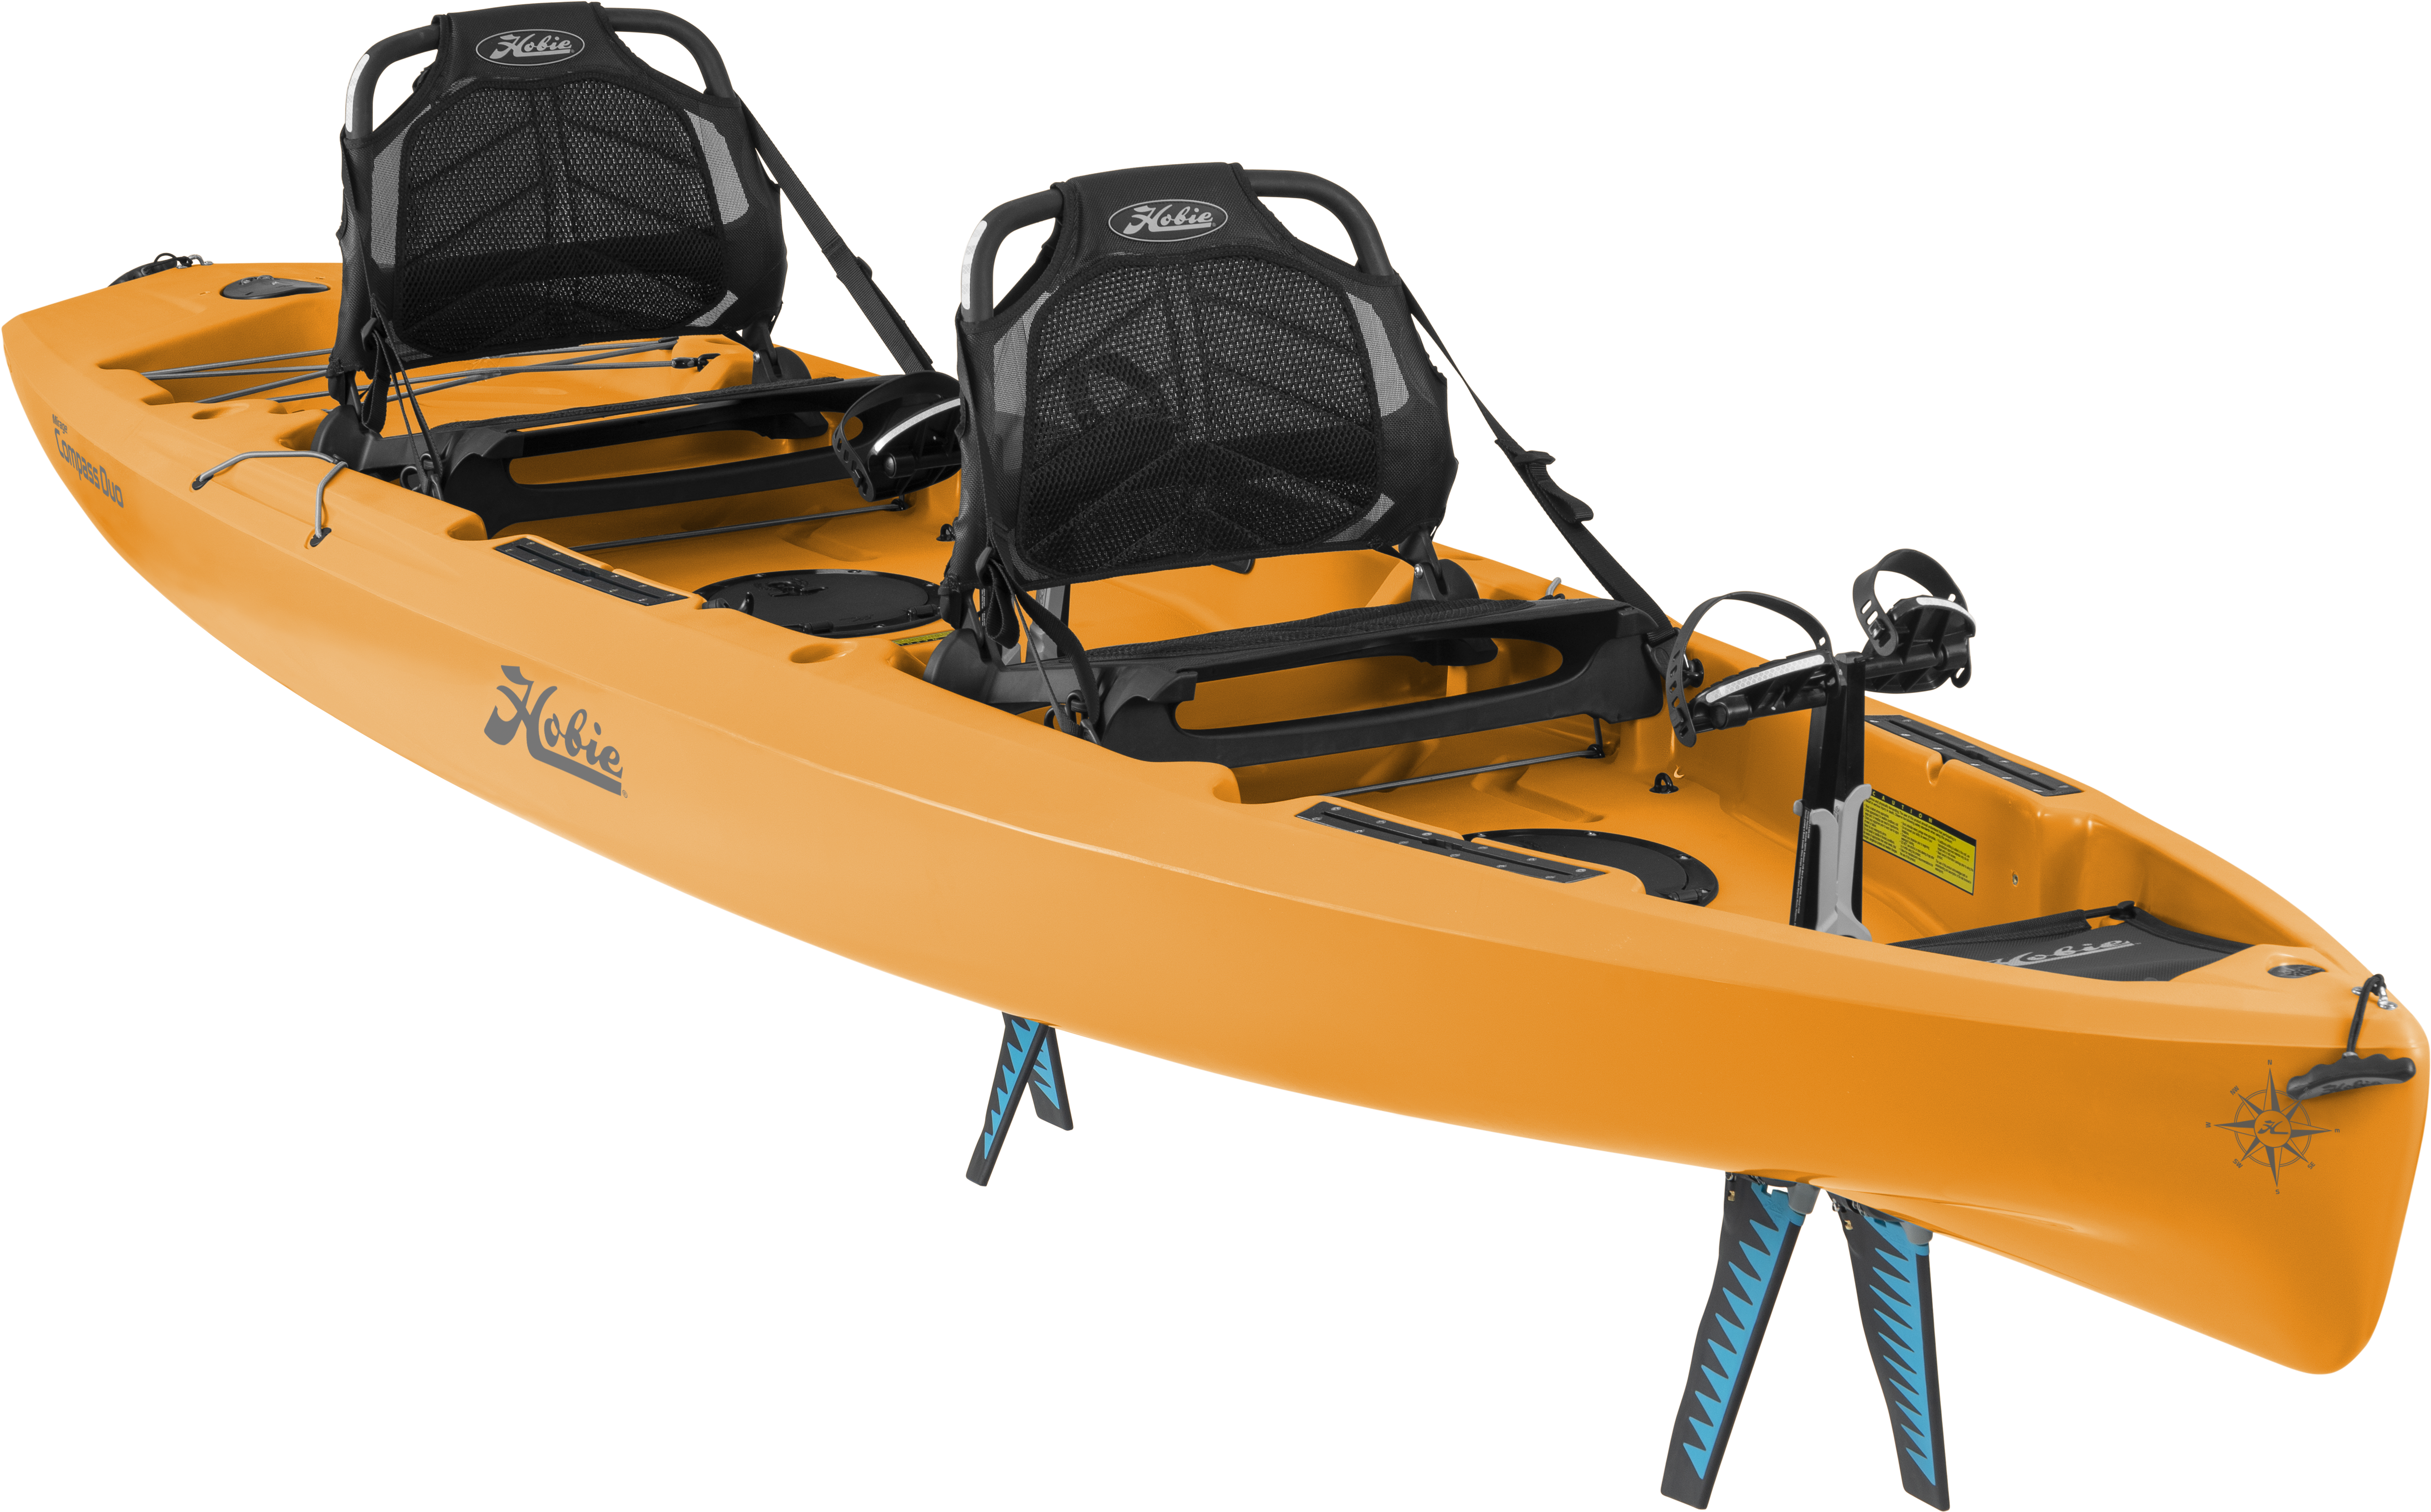 A Yellow Kayak With Two Seats